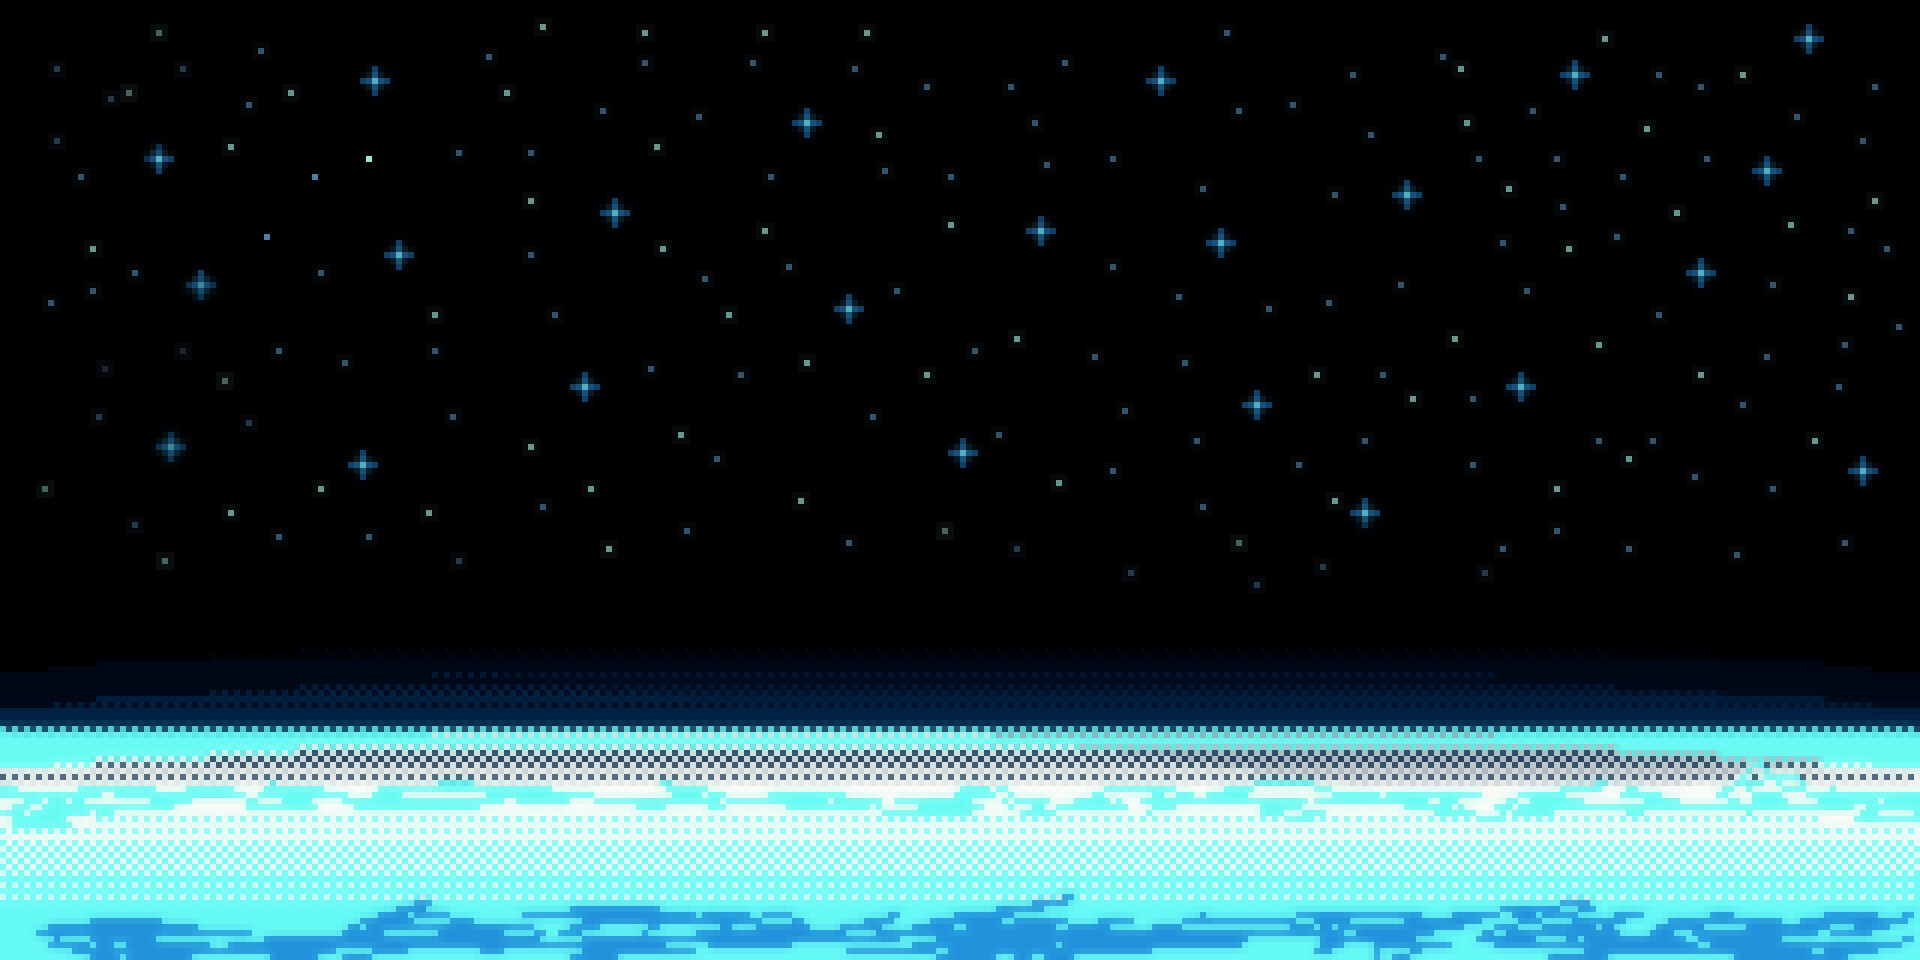 pixel space background